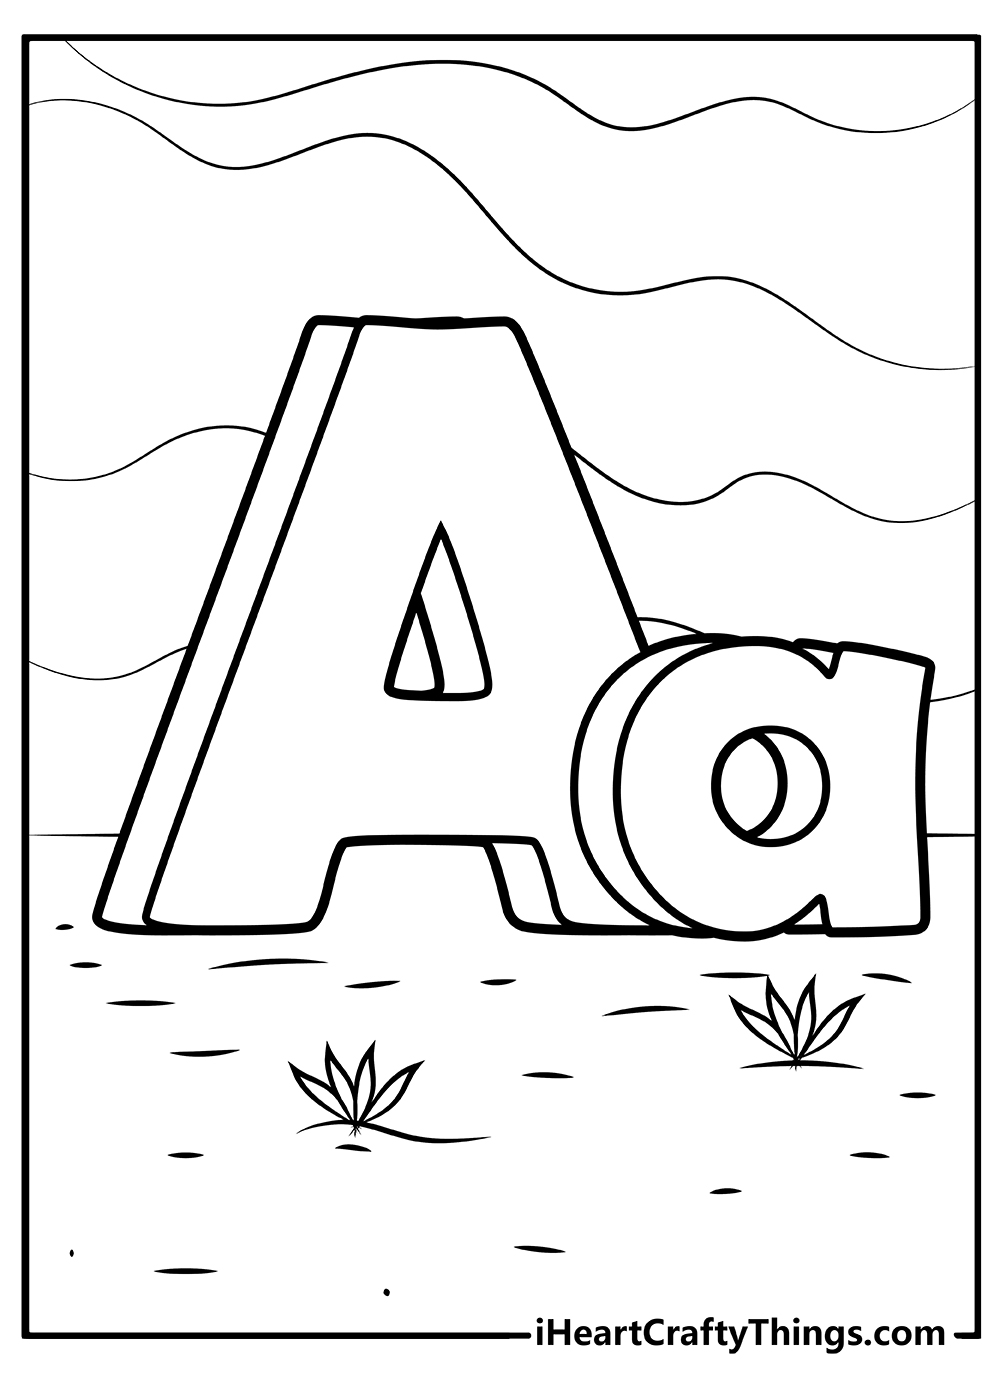 Printable Alphabet Coloring Page (Updated 2022) - Coloring Home